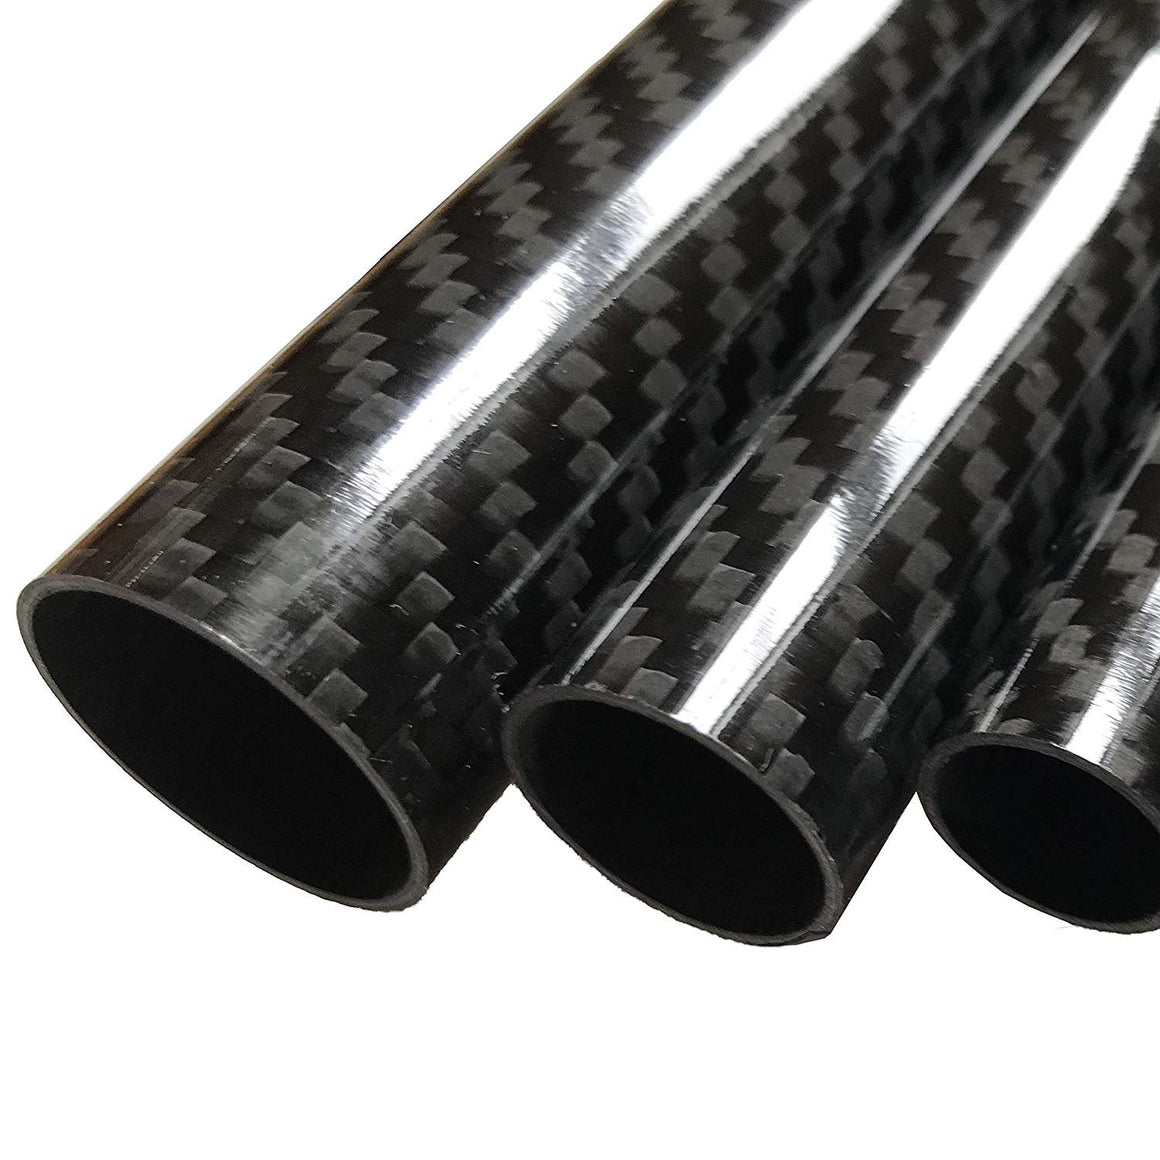 10) Pieces - 2mm x 1000mm Carbon Fiber RODS - Solid Pultruded Round R 